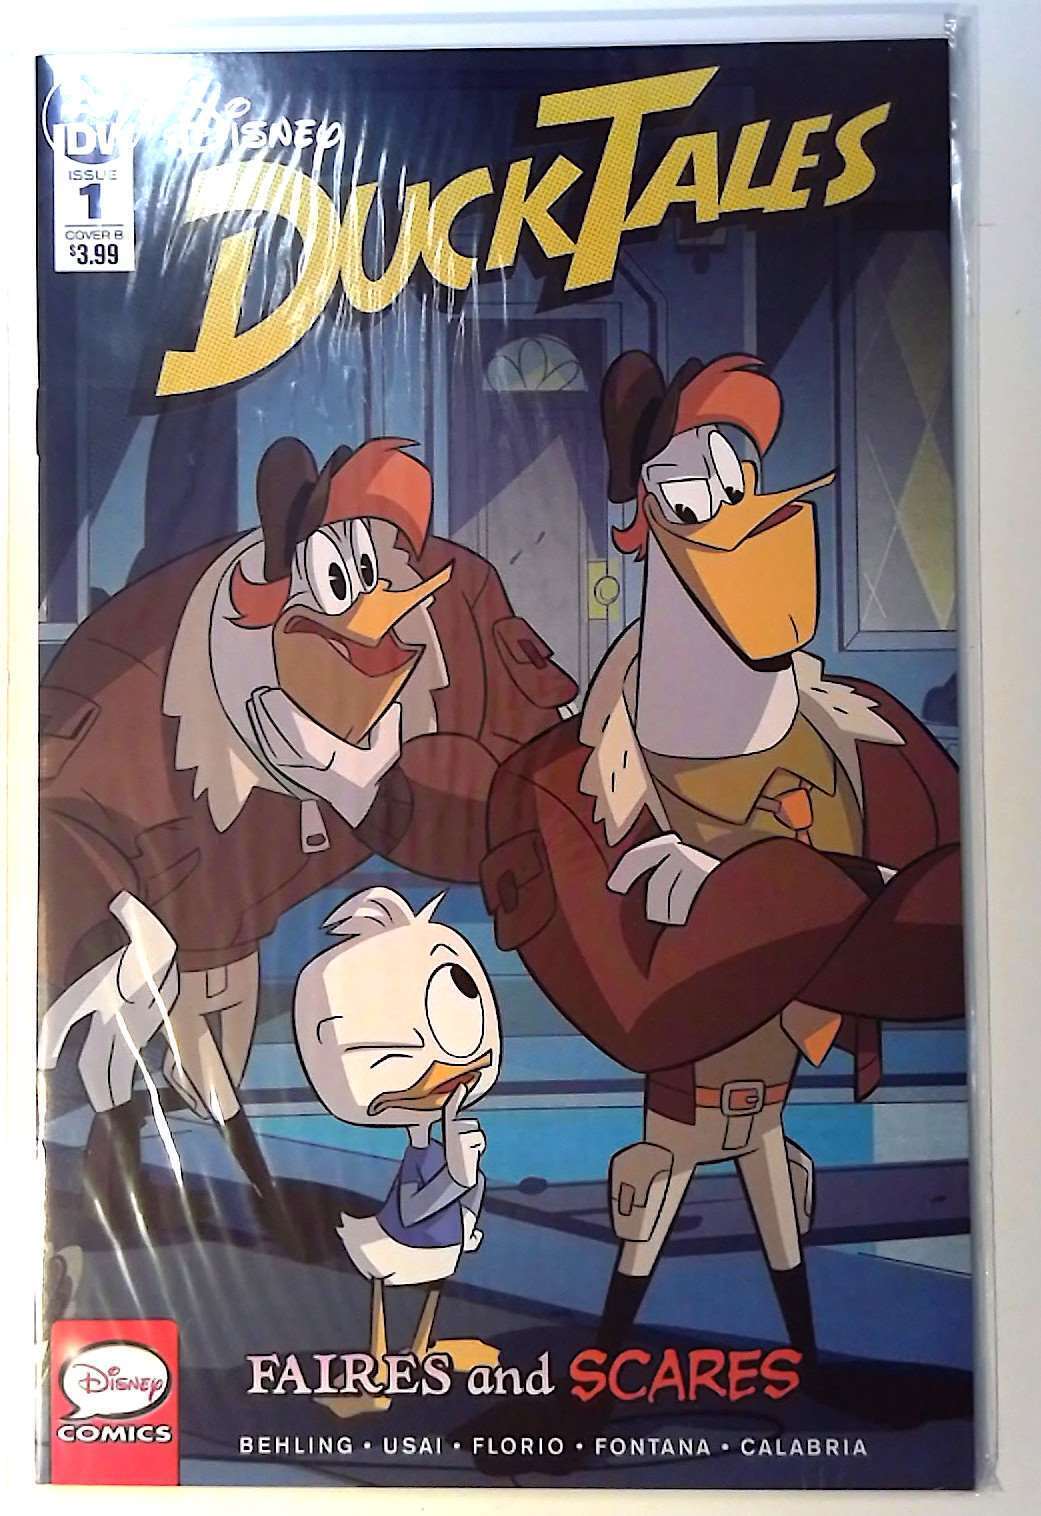 DuckTales: Faires and Scares #1 b IDW (2019) Variant 1st Print Comic Book